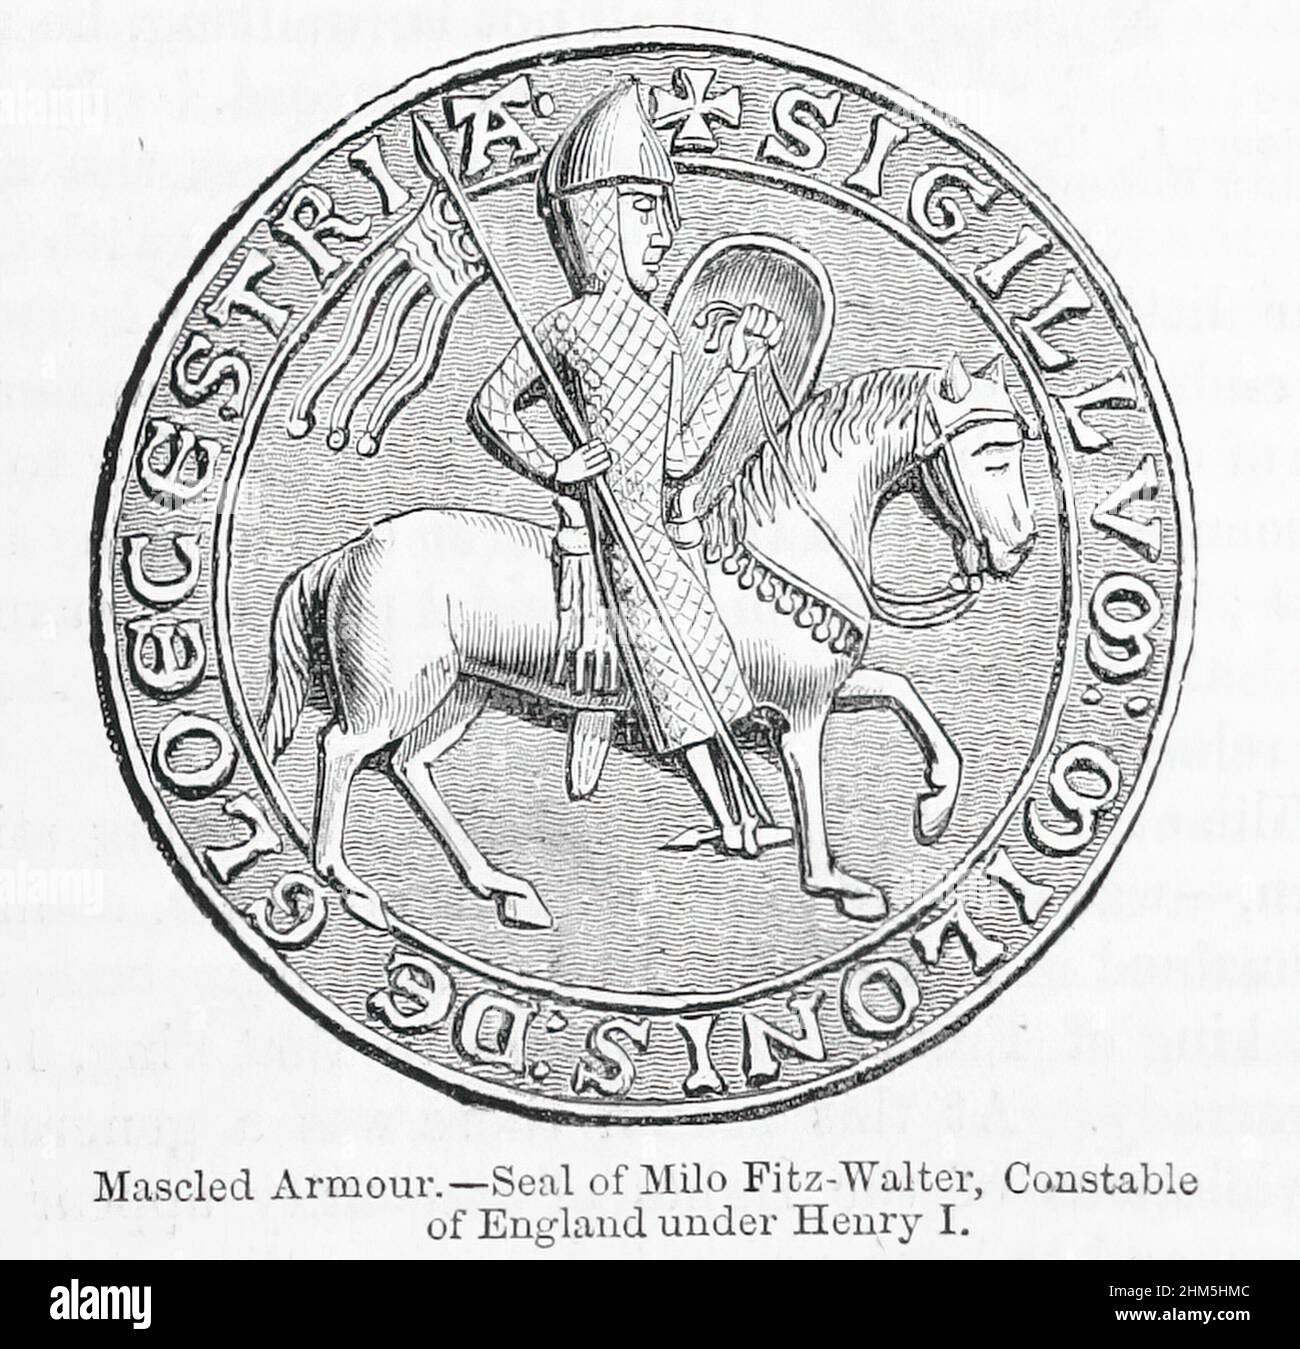 Mascled Armour.— Seal of Milo Fitz-Walter, Constable of England under Henry I - Image taken from 'The Popular History Of England: An Illustrated History Of Society And Government From The Earliest Period To Our OwnTimesBy Charles KNIGHT - London. Bradbury and Evans. 1856-1862 Stock Photo